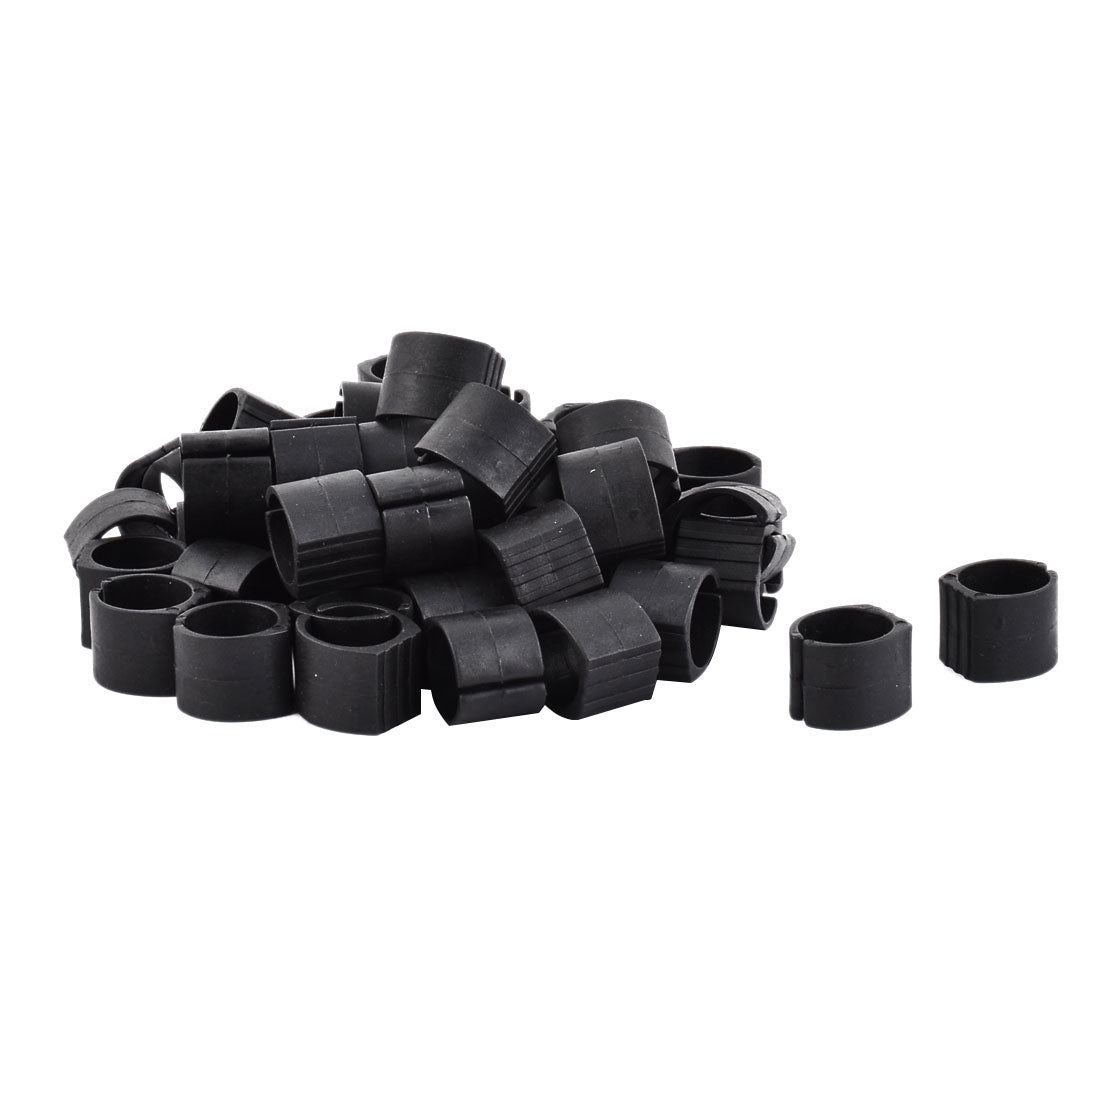 uxcell Uxcell Home Plastic Furniture Chair Foot Tubing Slide Sratch Prevent Tube Pipe Insert Black 50pcs